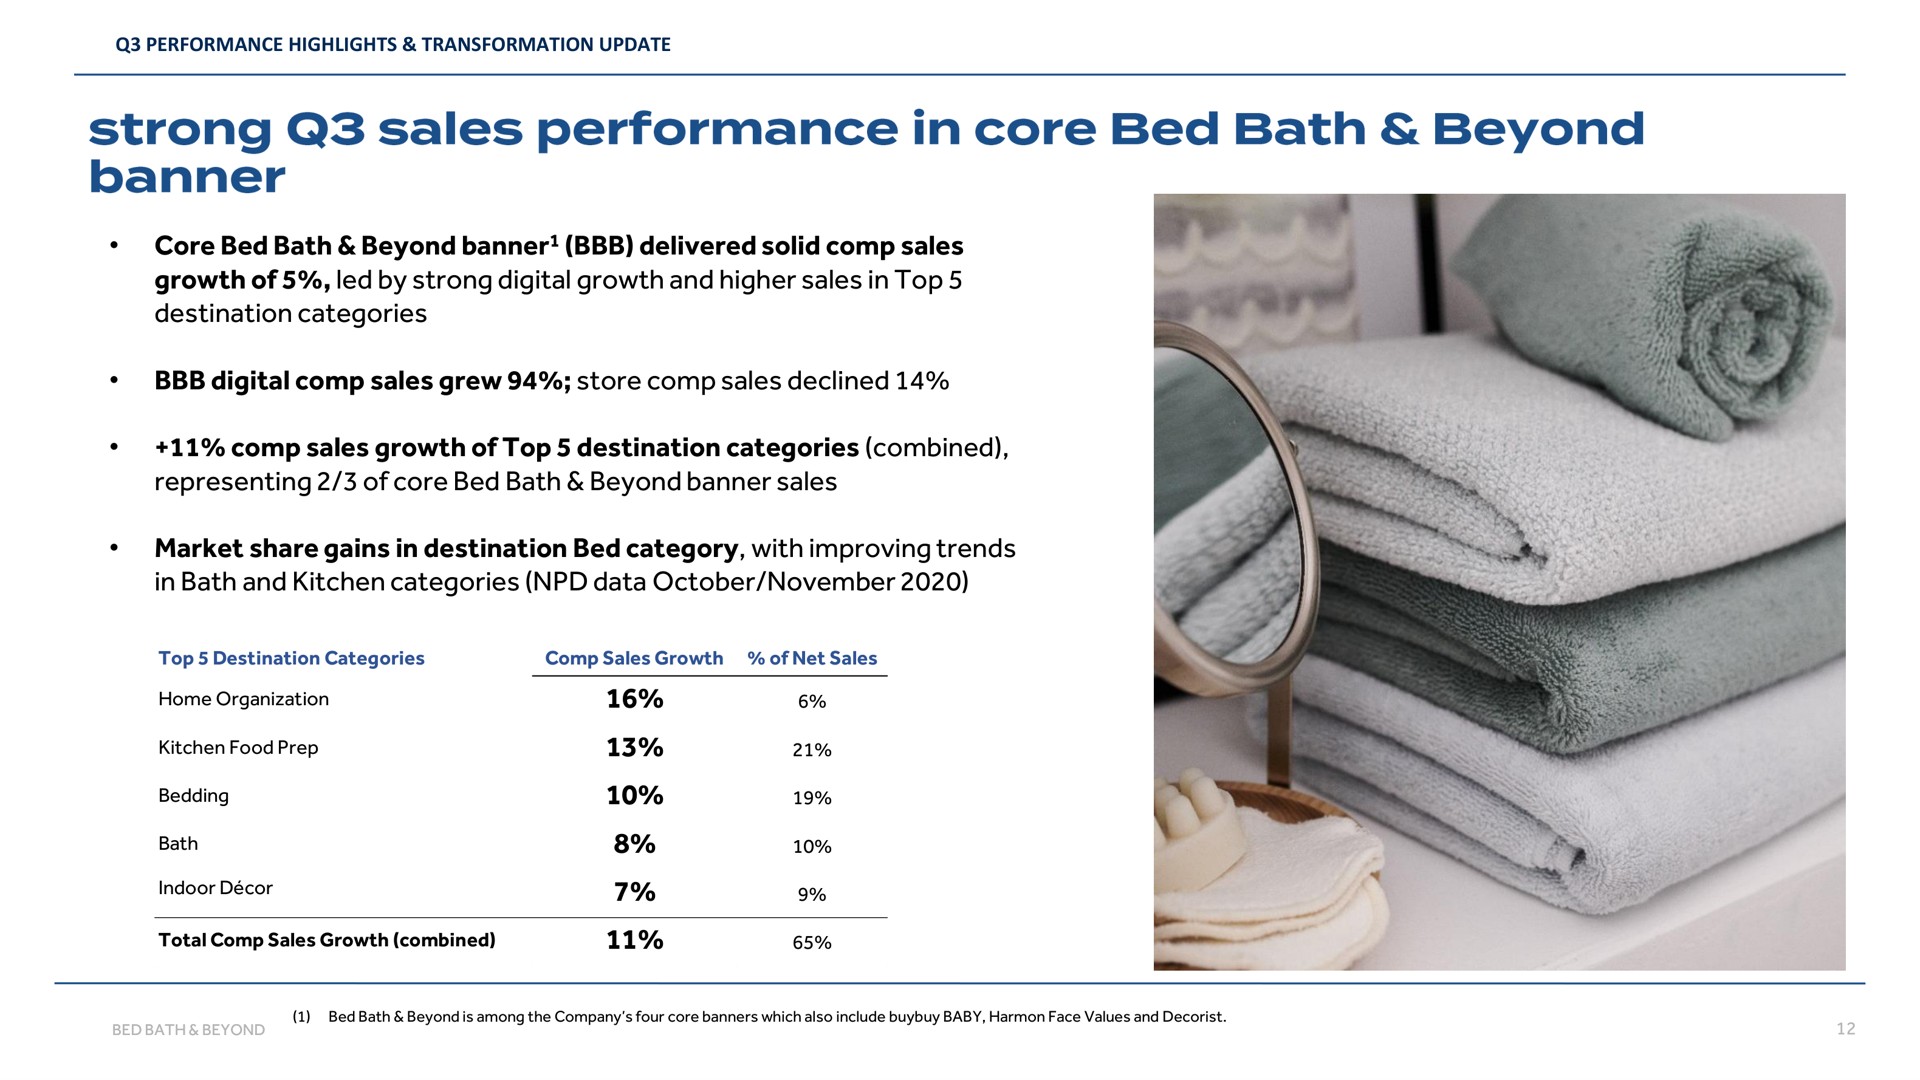 core bed bath beyond banner delivered solid sales growth of led by strong digital growth and higher sales in top destination categories digital sales grew store sales declined sales growth of top destination categories combined representing of core bed bath beyond banner sales market share gains in destination bed category with improving trends in bath and kitchen categories data performance | Bed Bath & Beyond